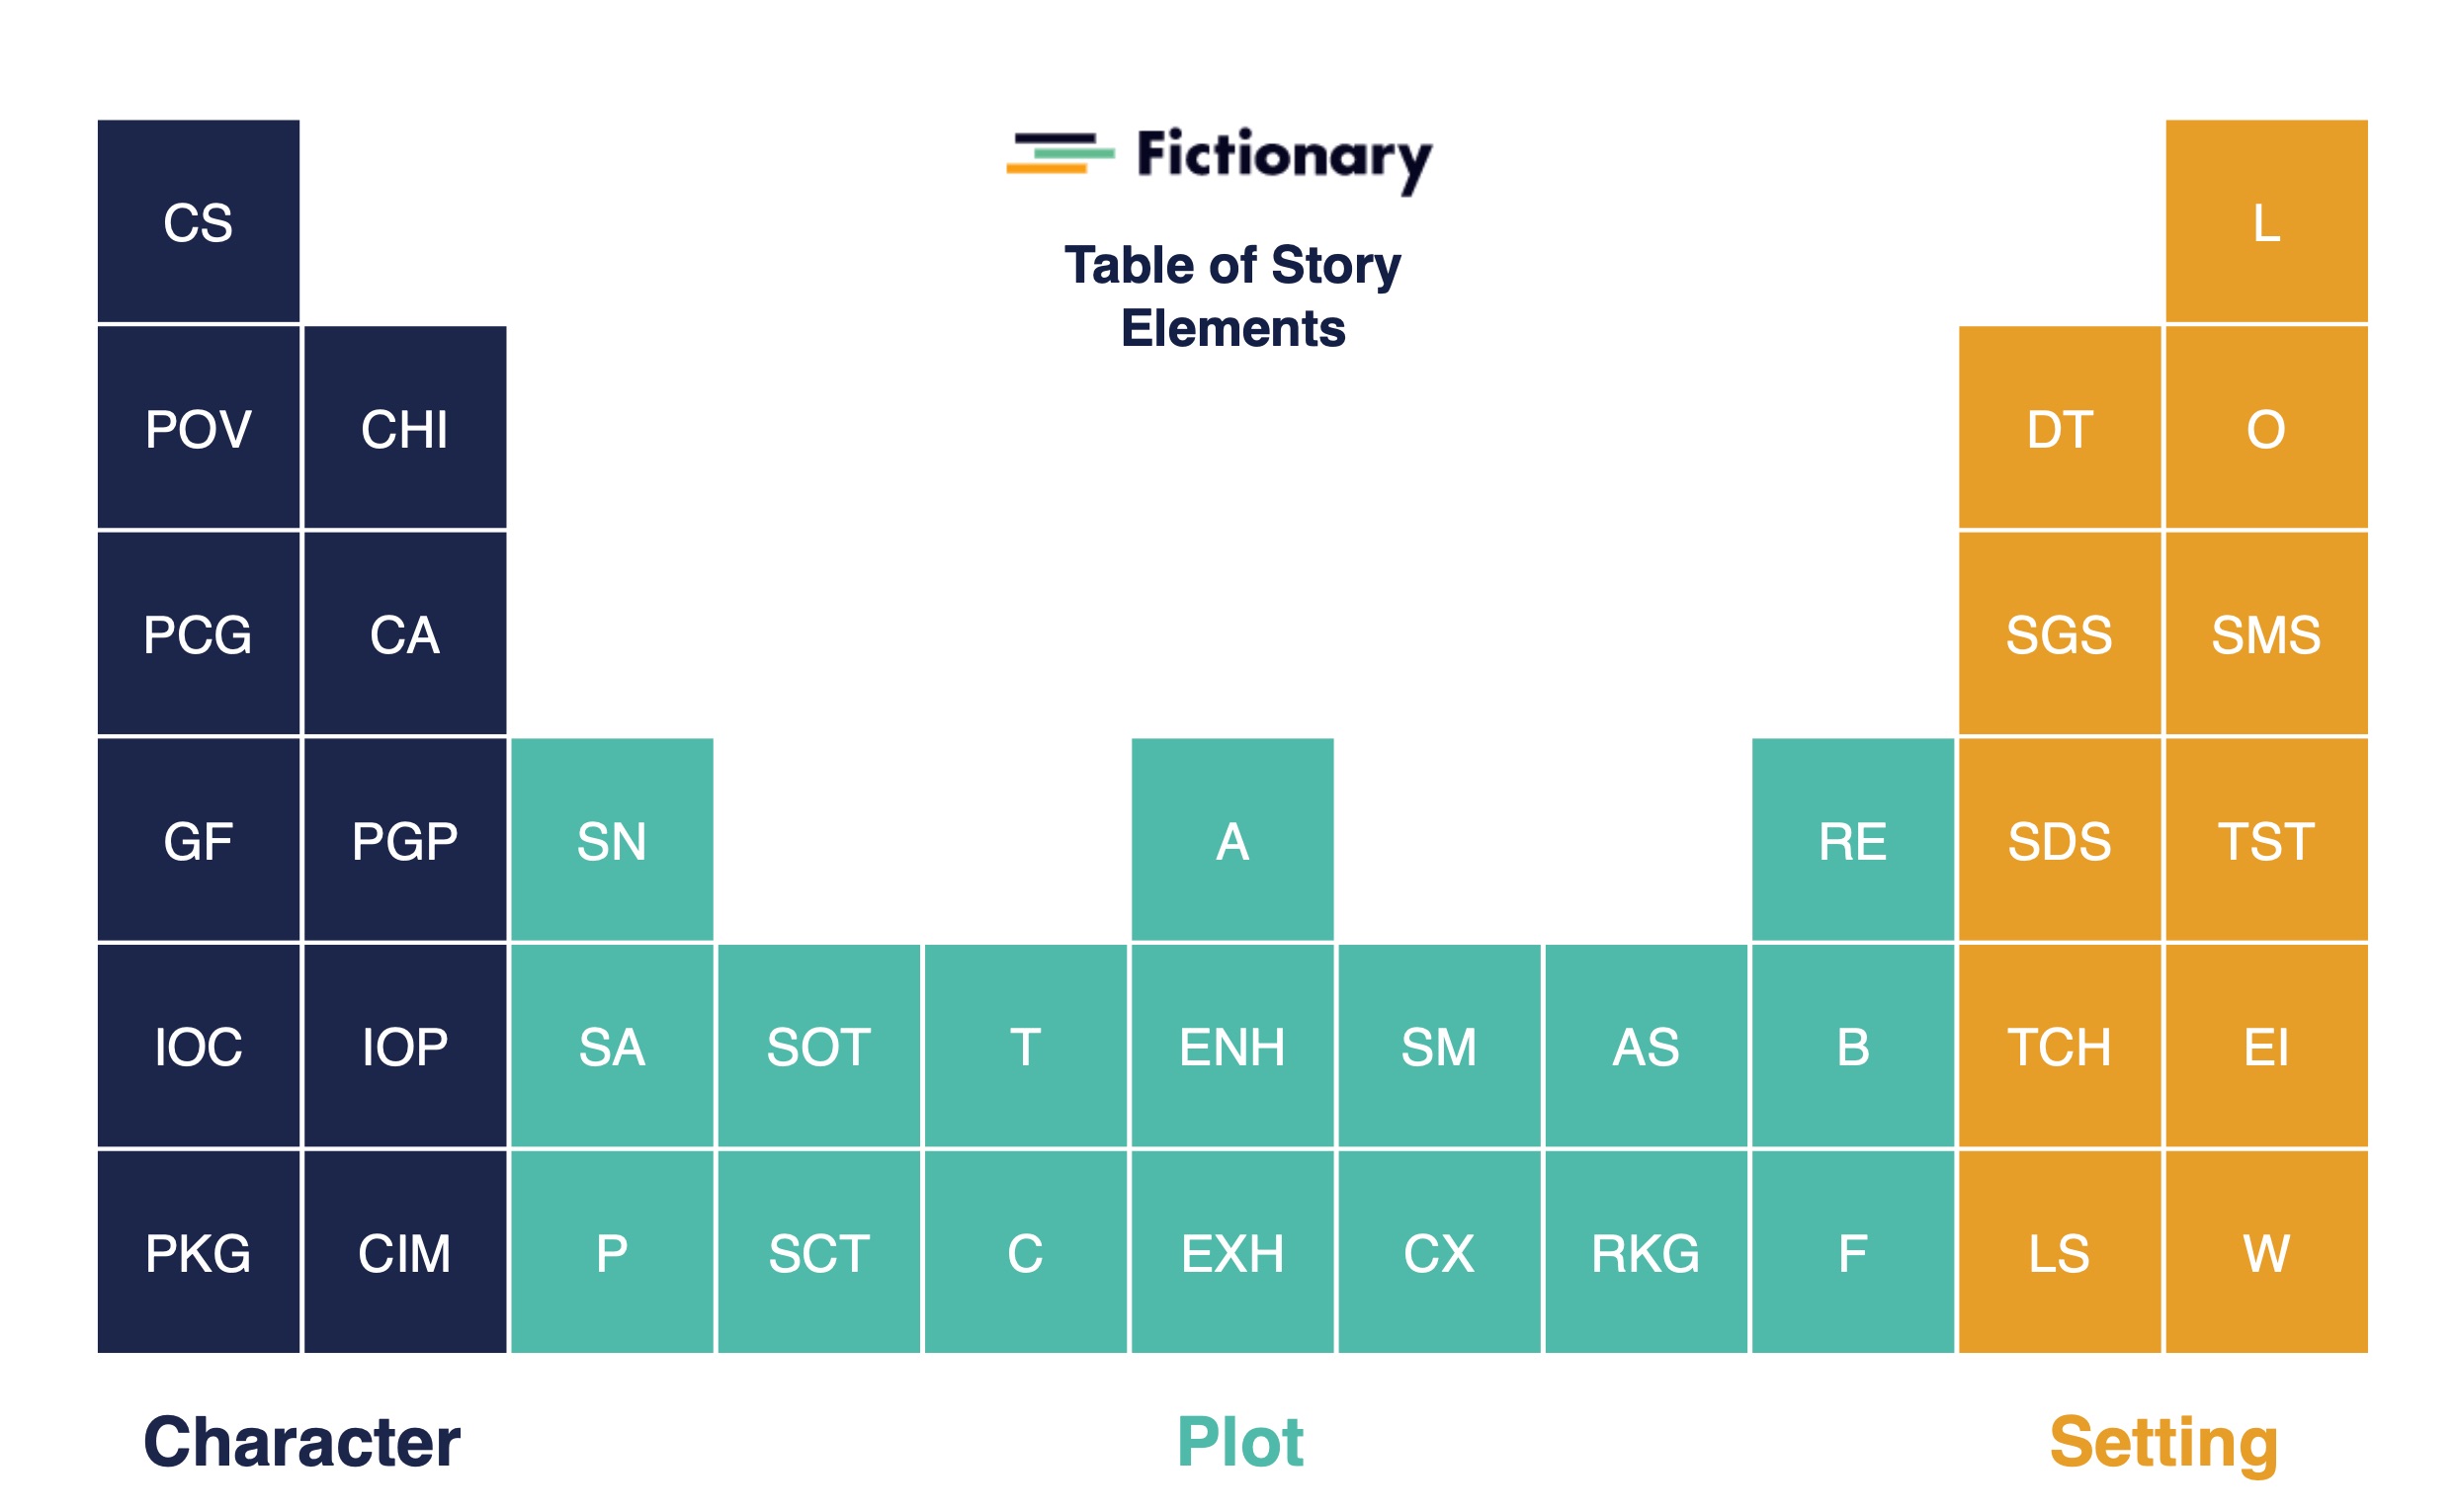 Fictionary Story Elements Table